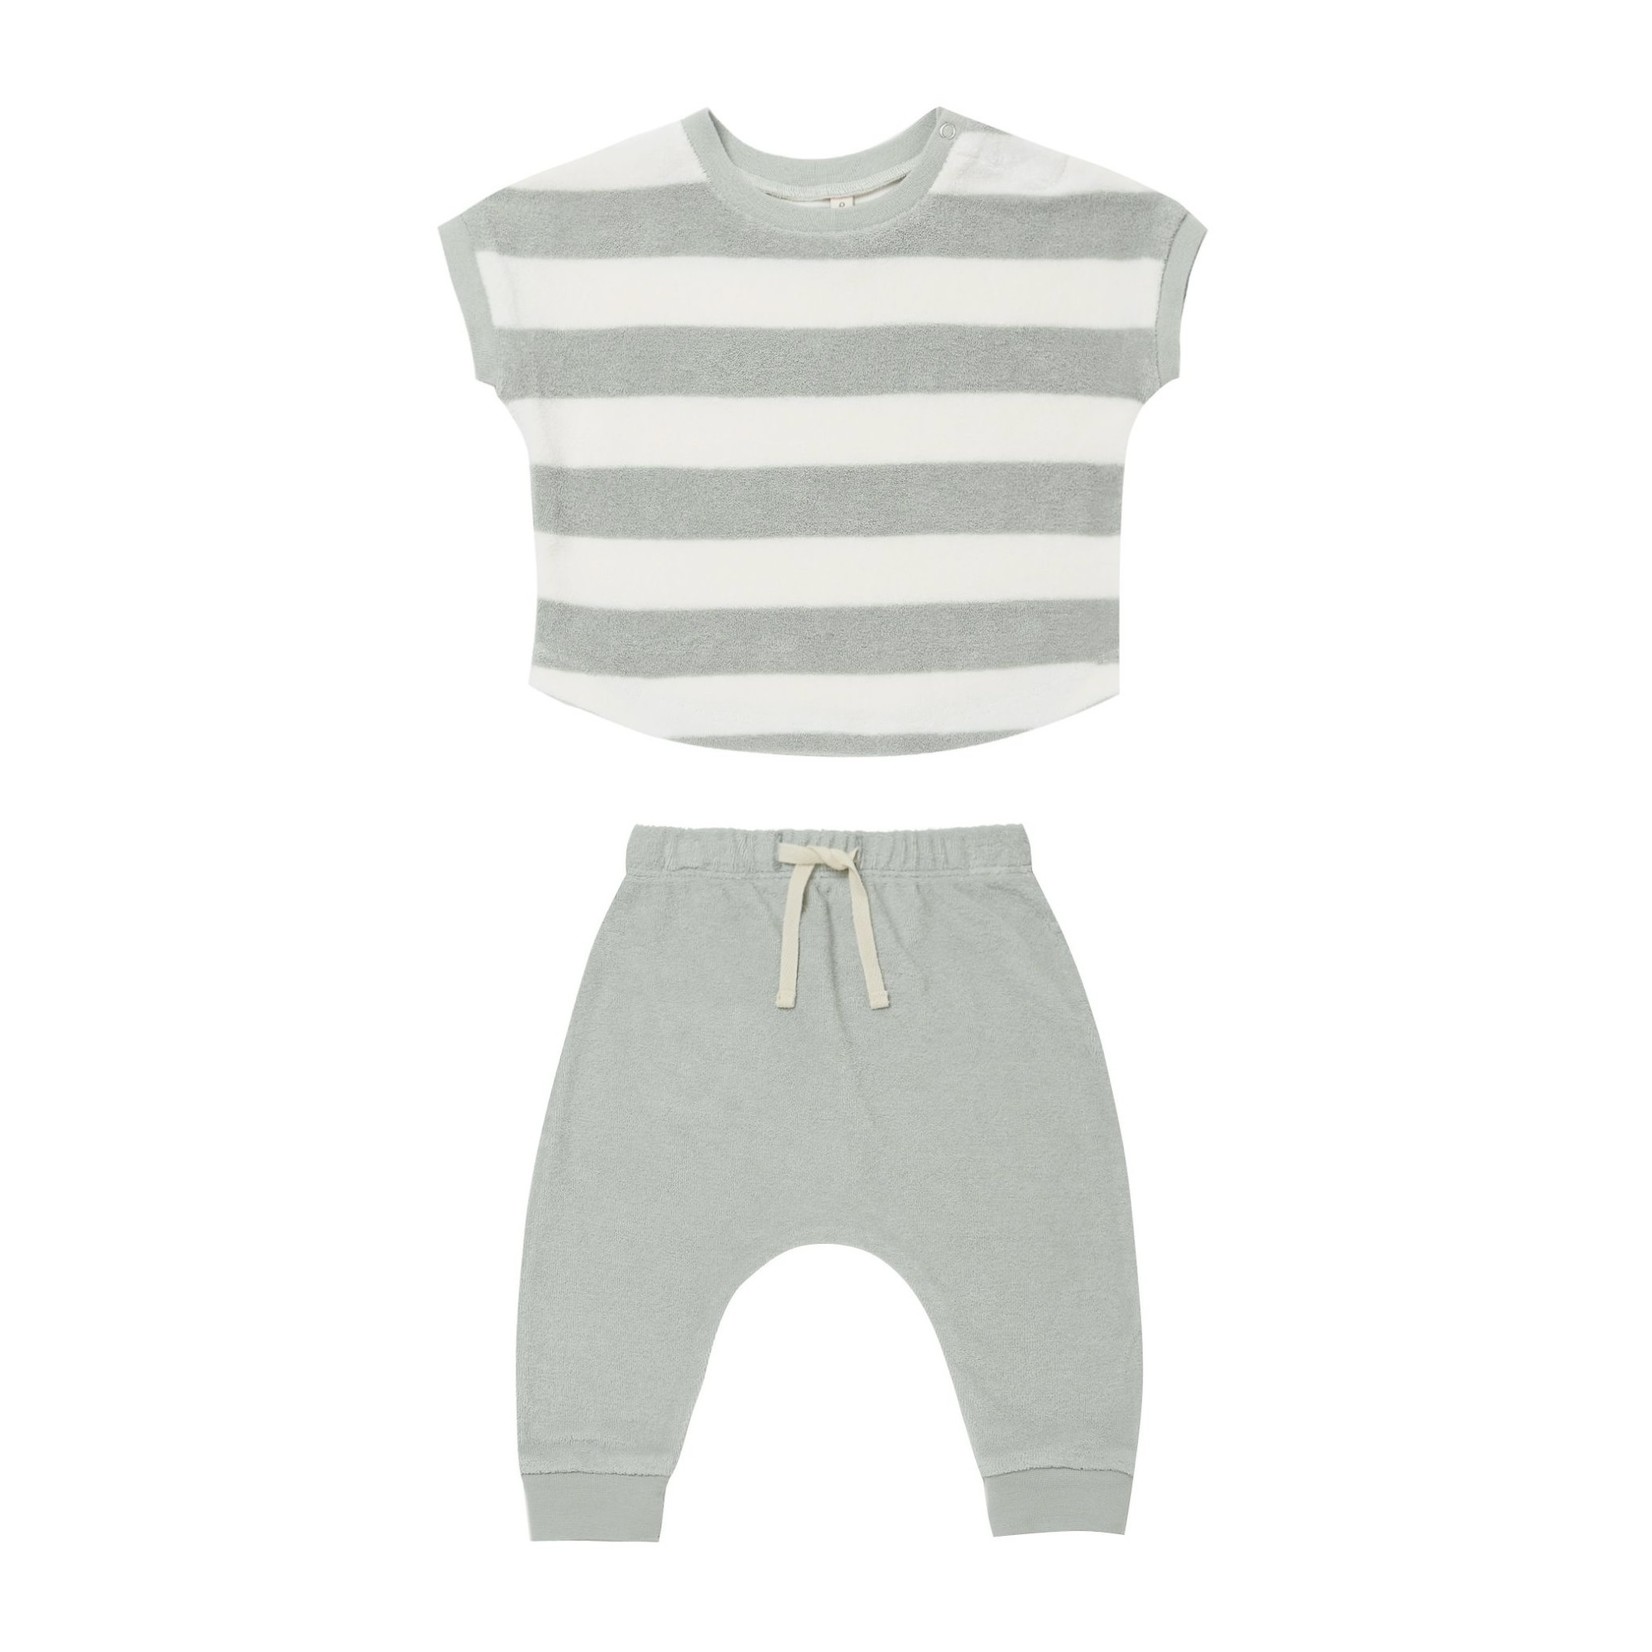 Quincy Mae Quincy Mae - Terry Tee + Pant Set